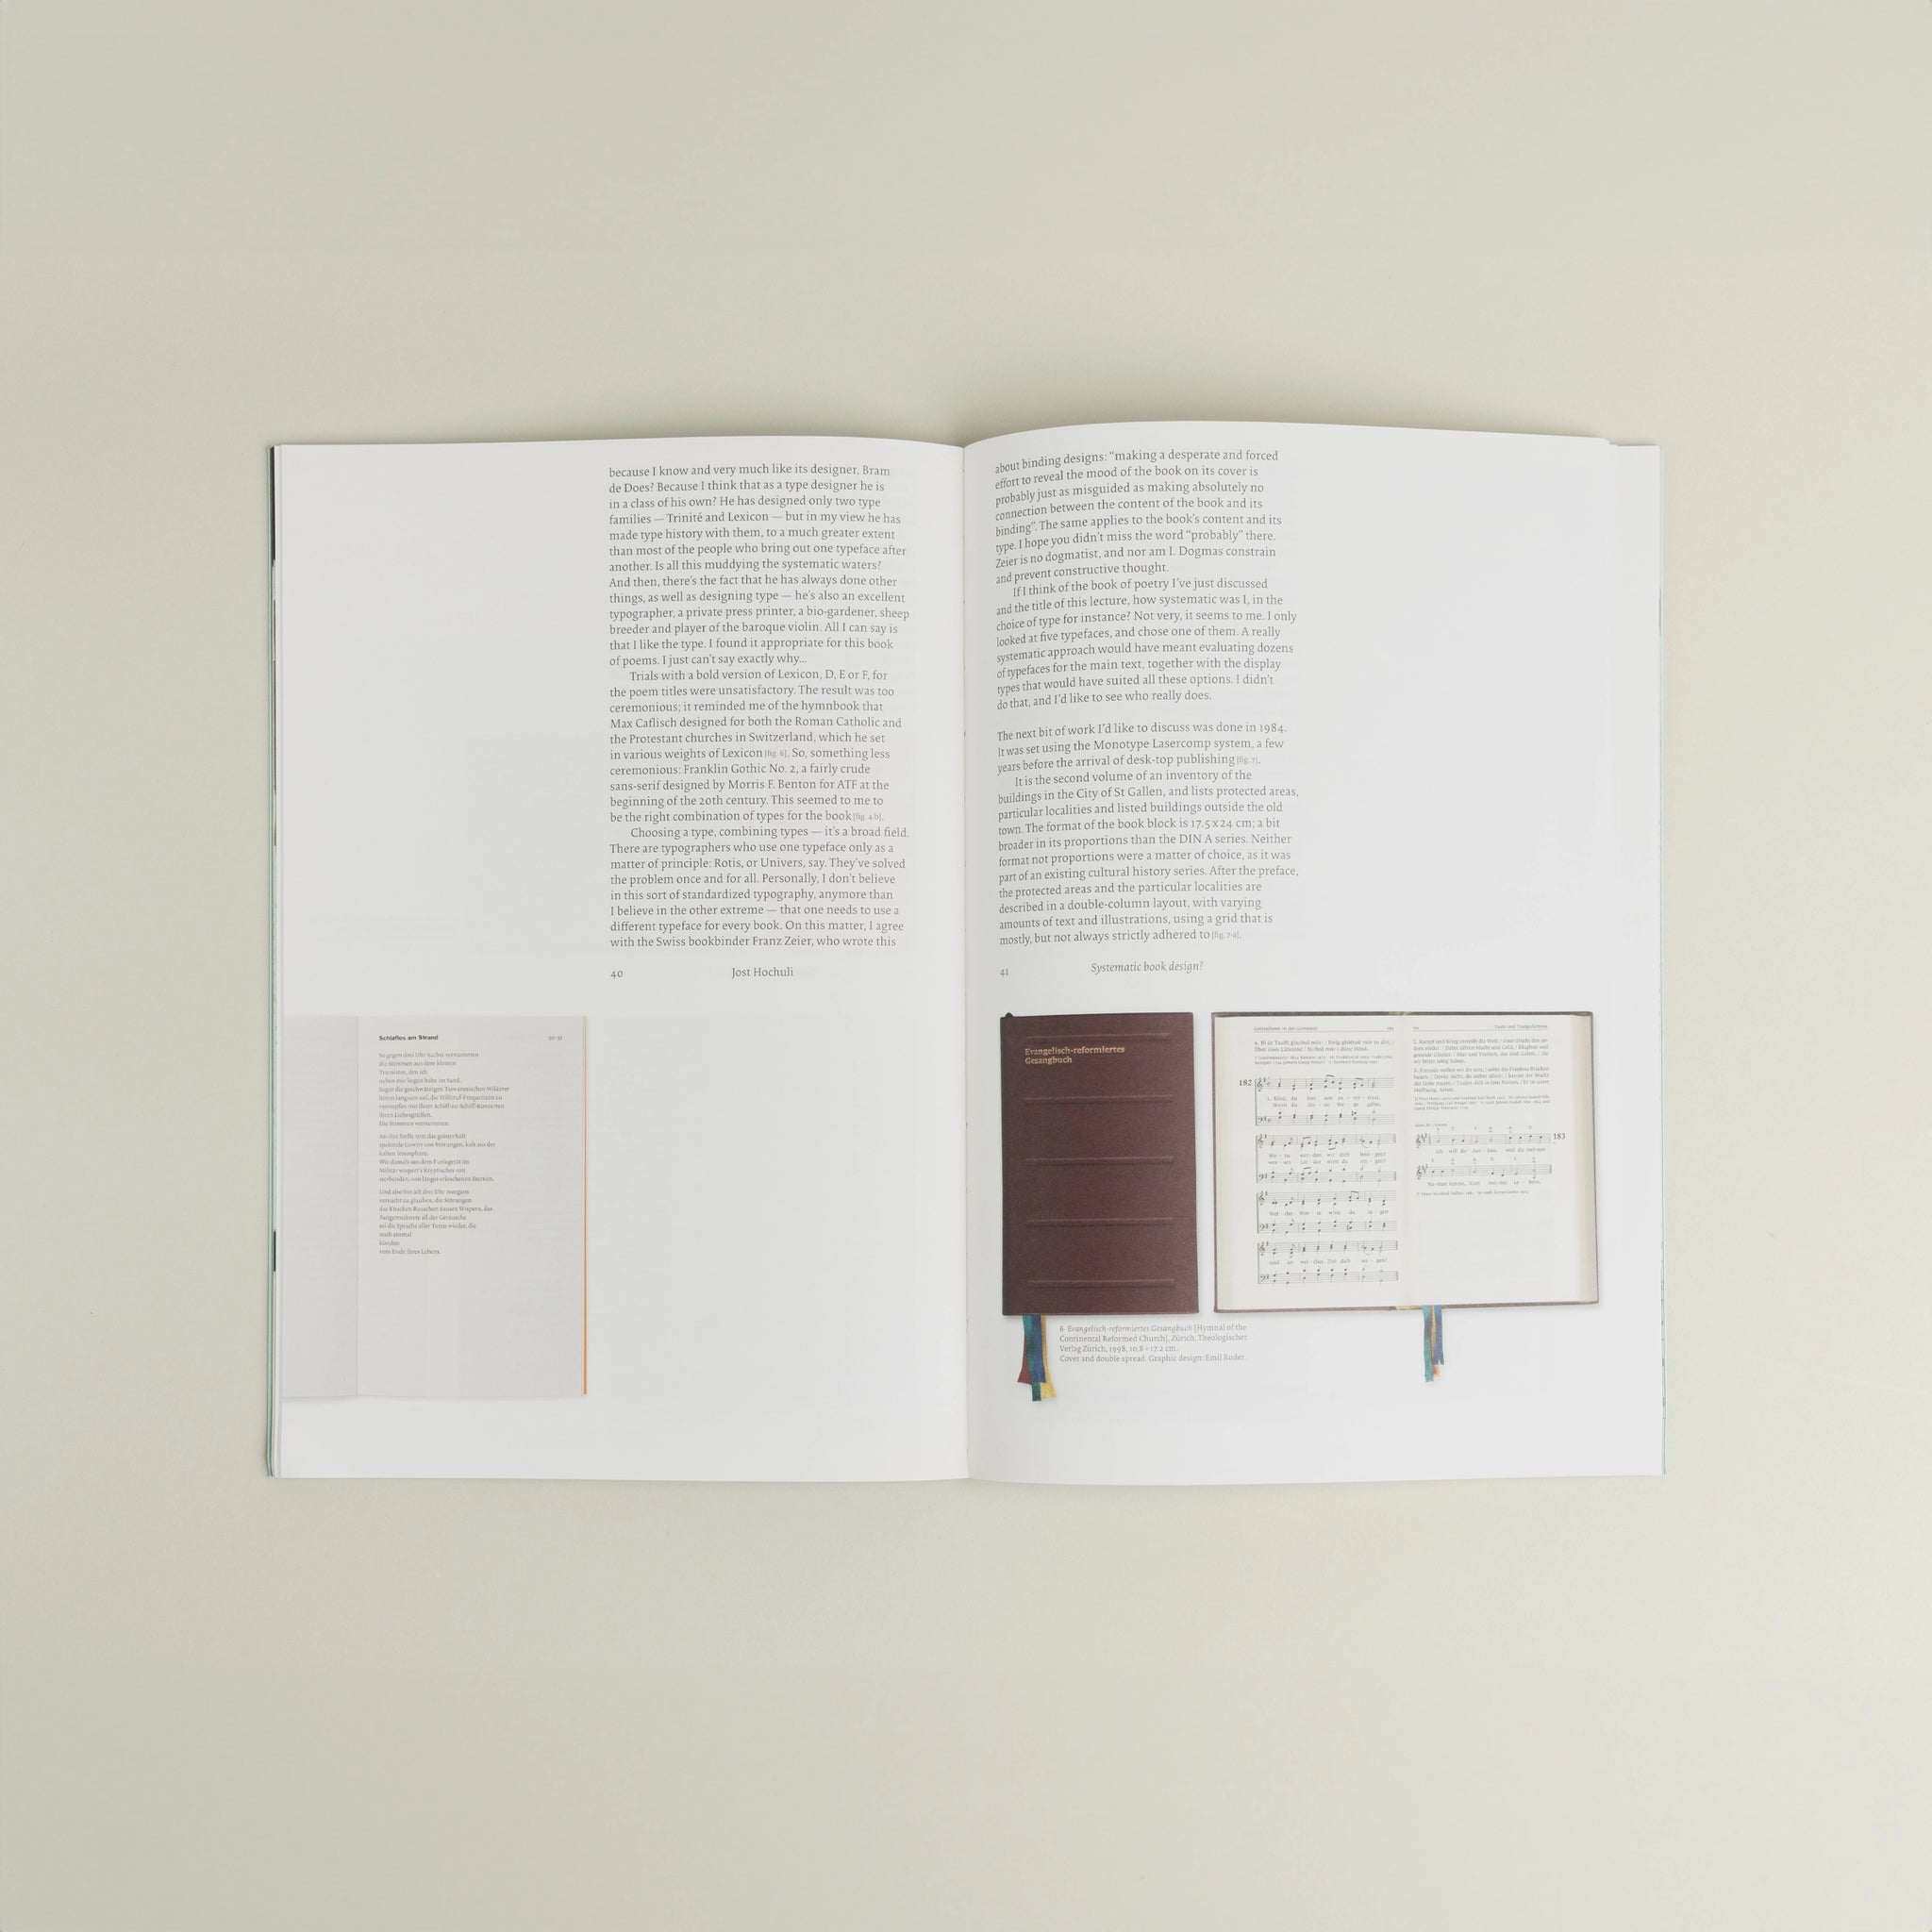 Systematic Book Design